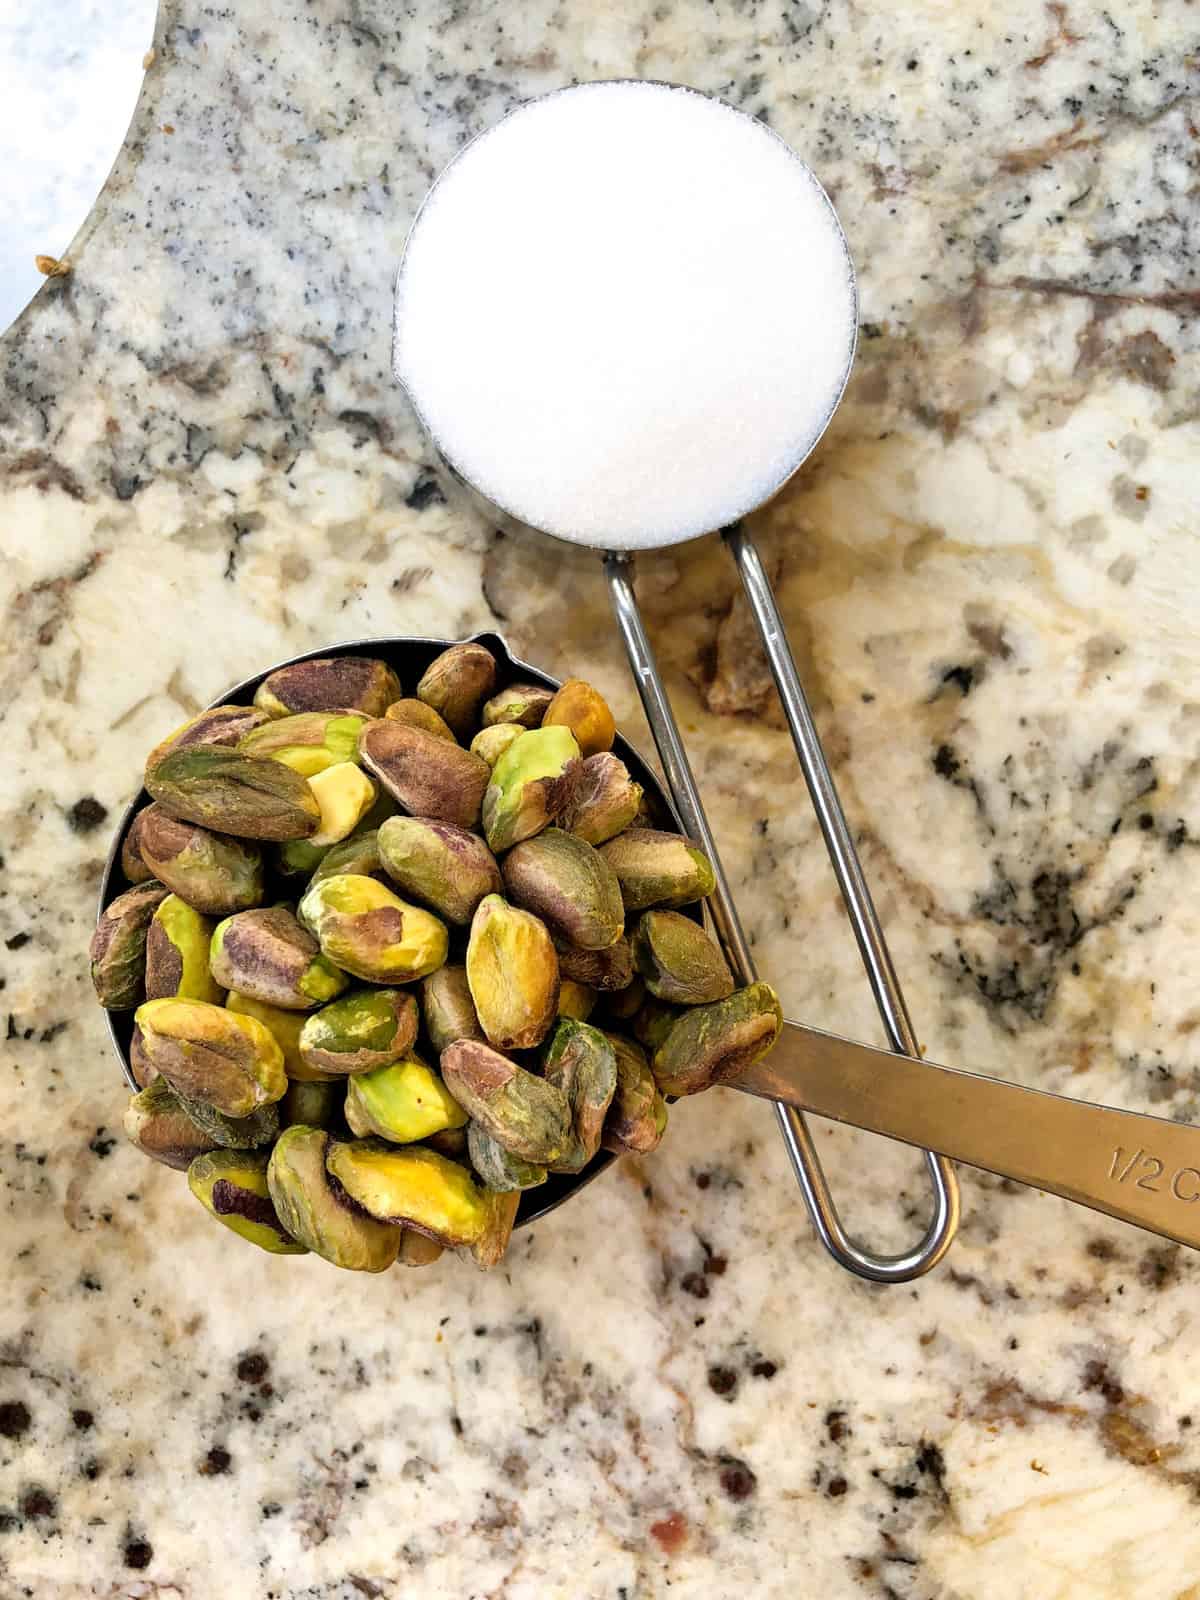 the base is pistachios and sugar